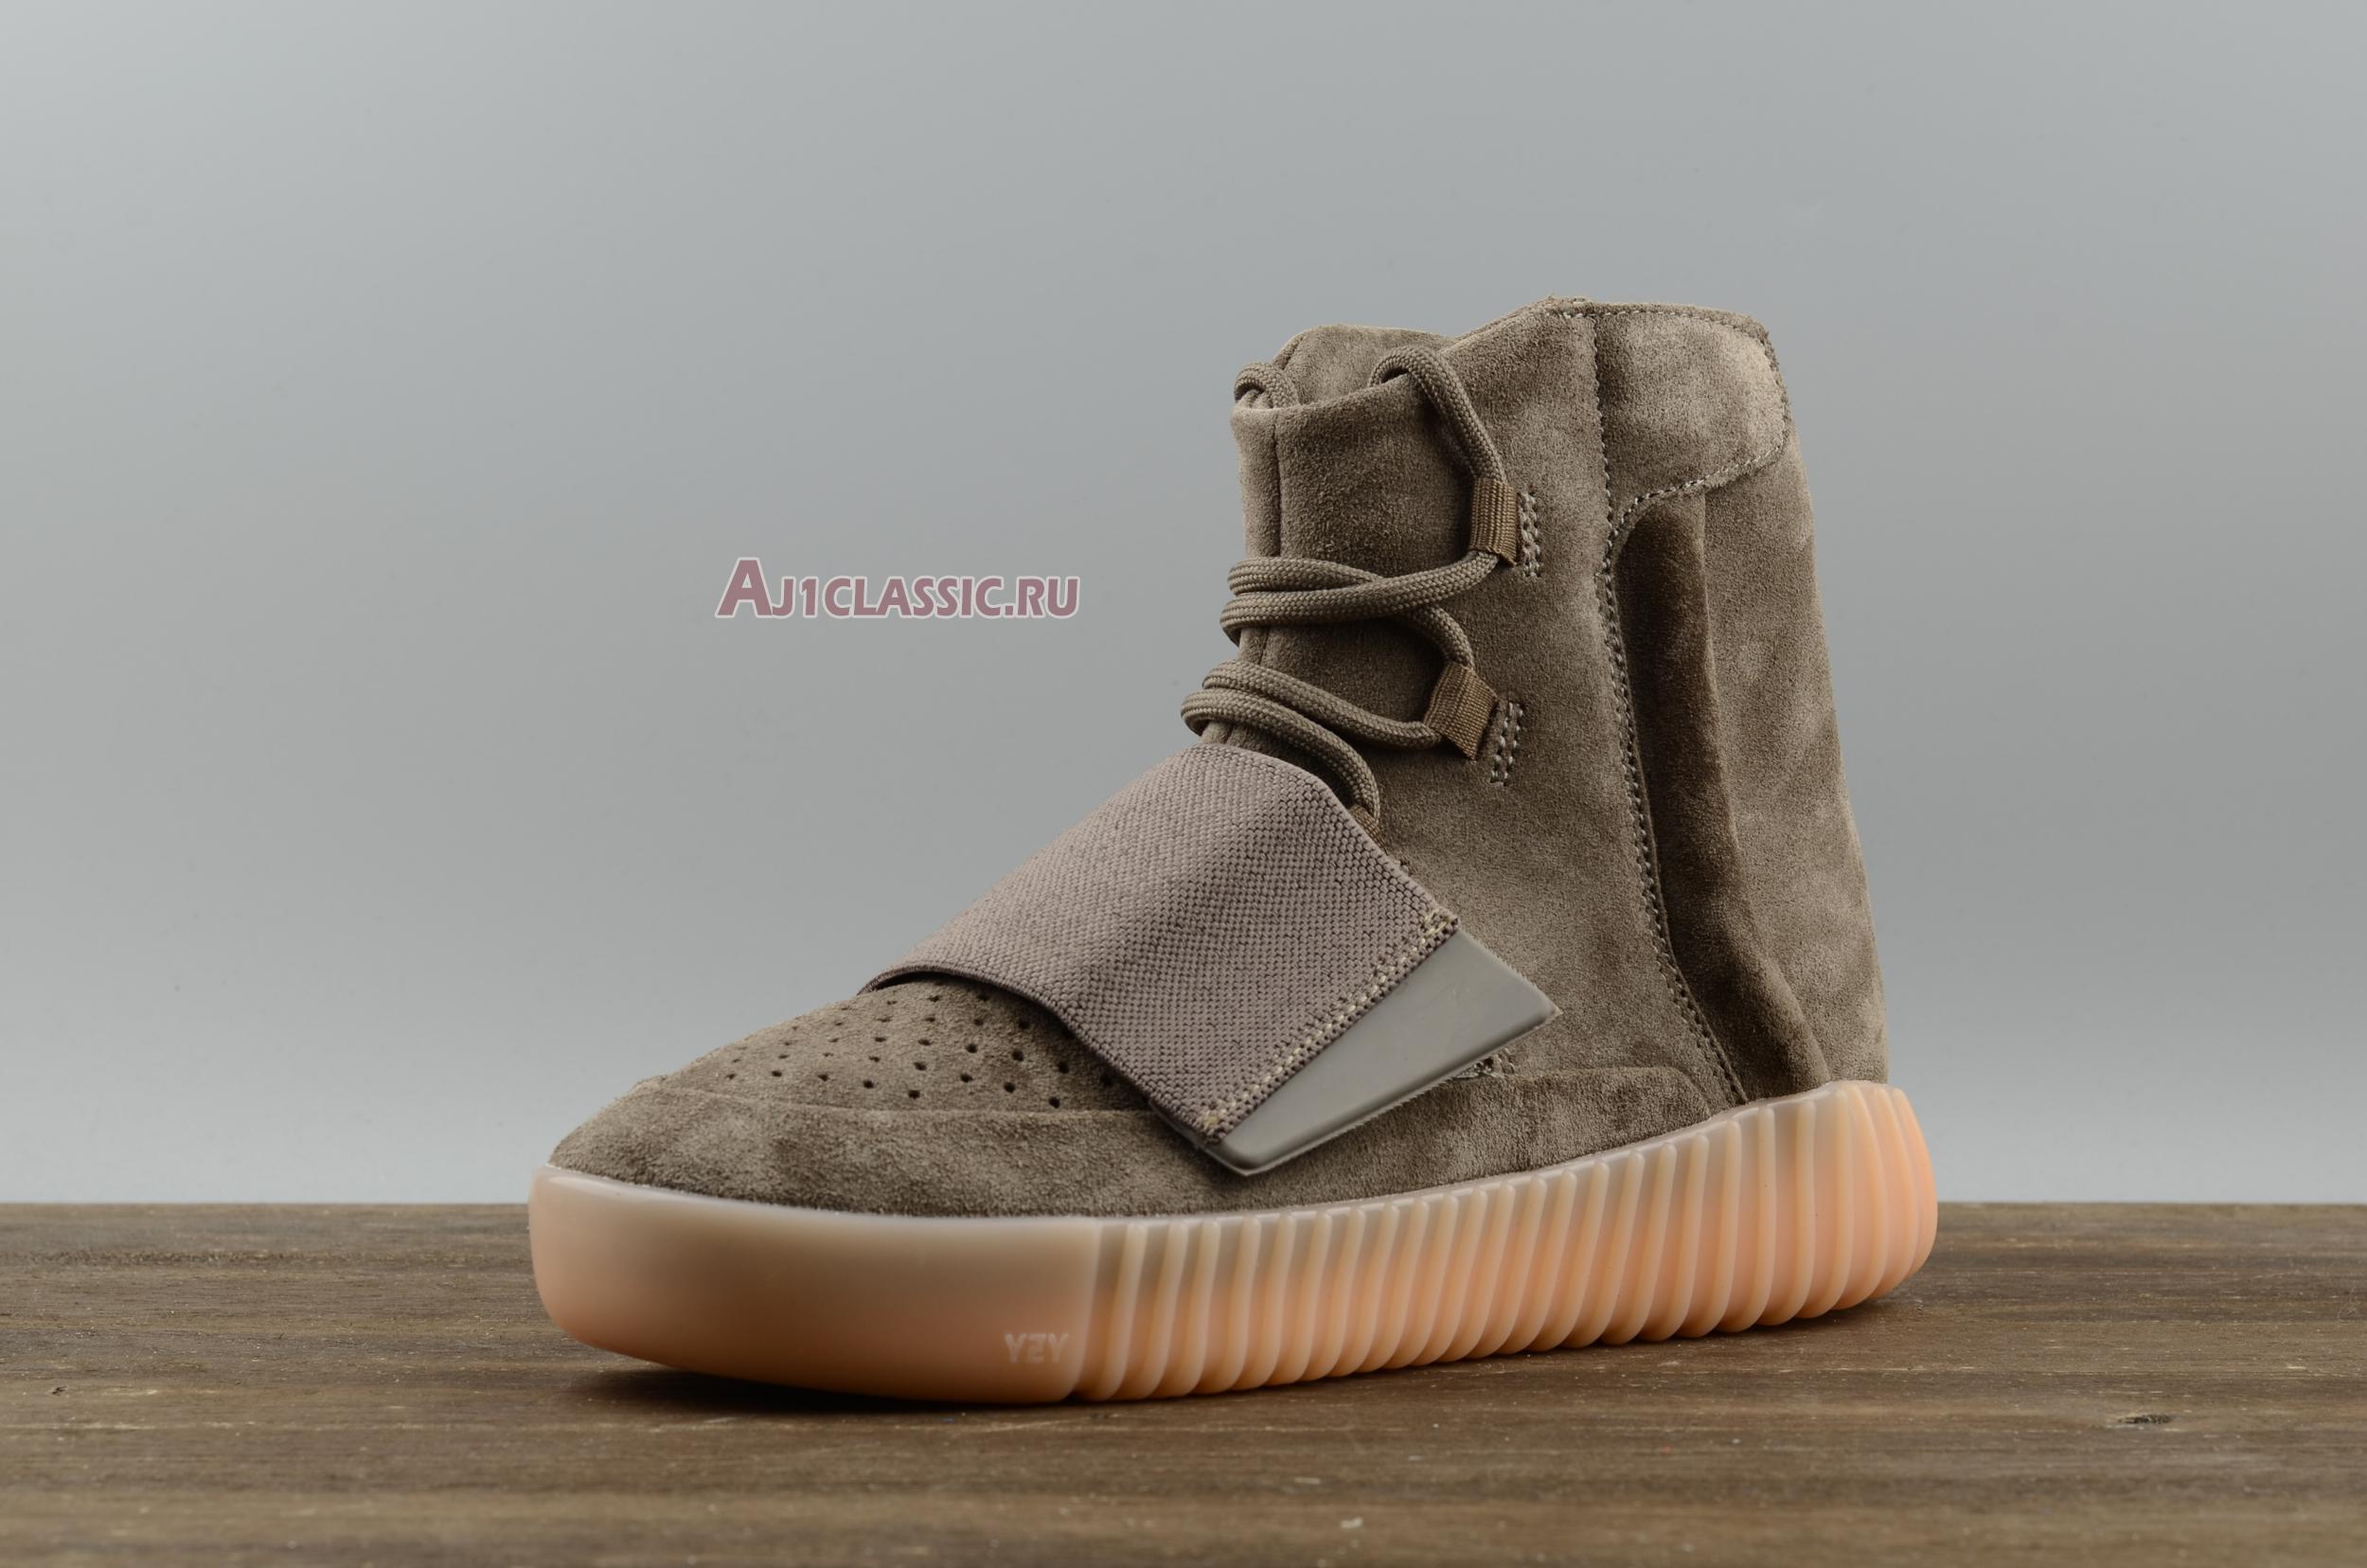 Adidas Yeezy Boost 750 "Chocolate" BY2456